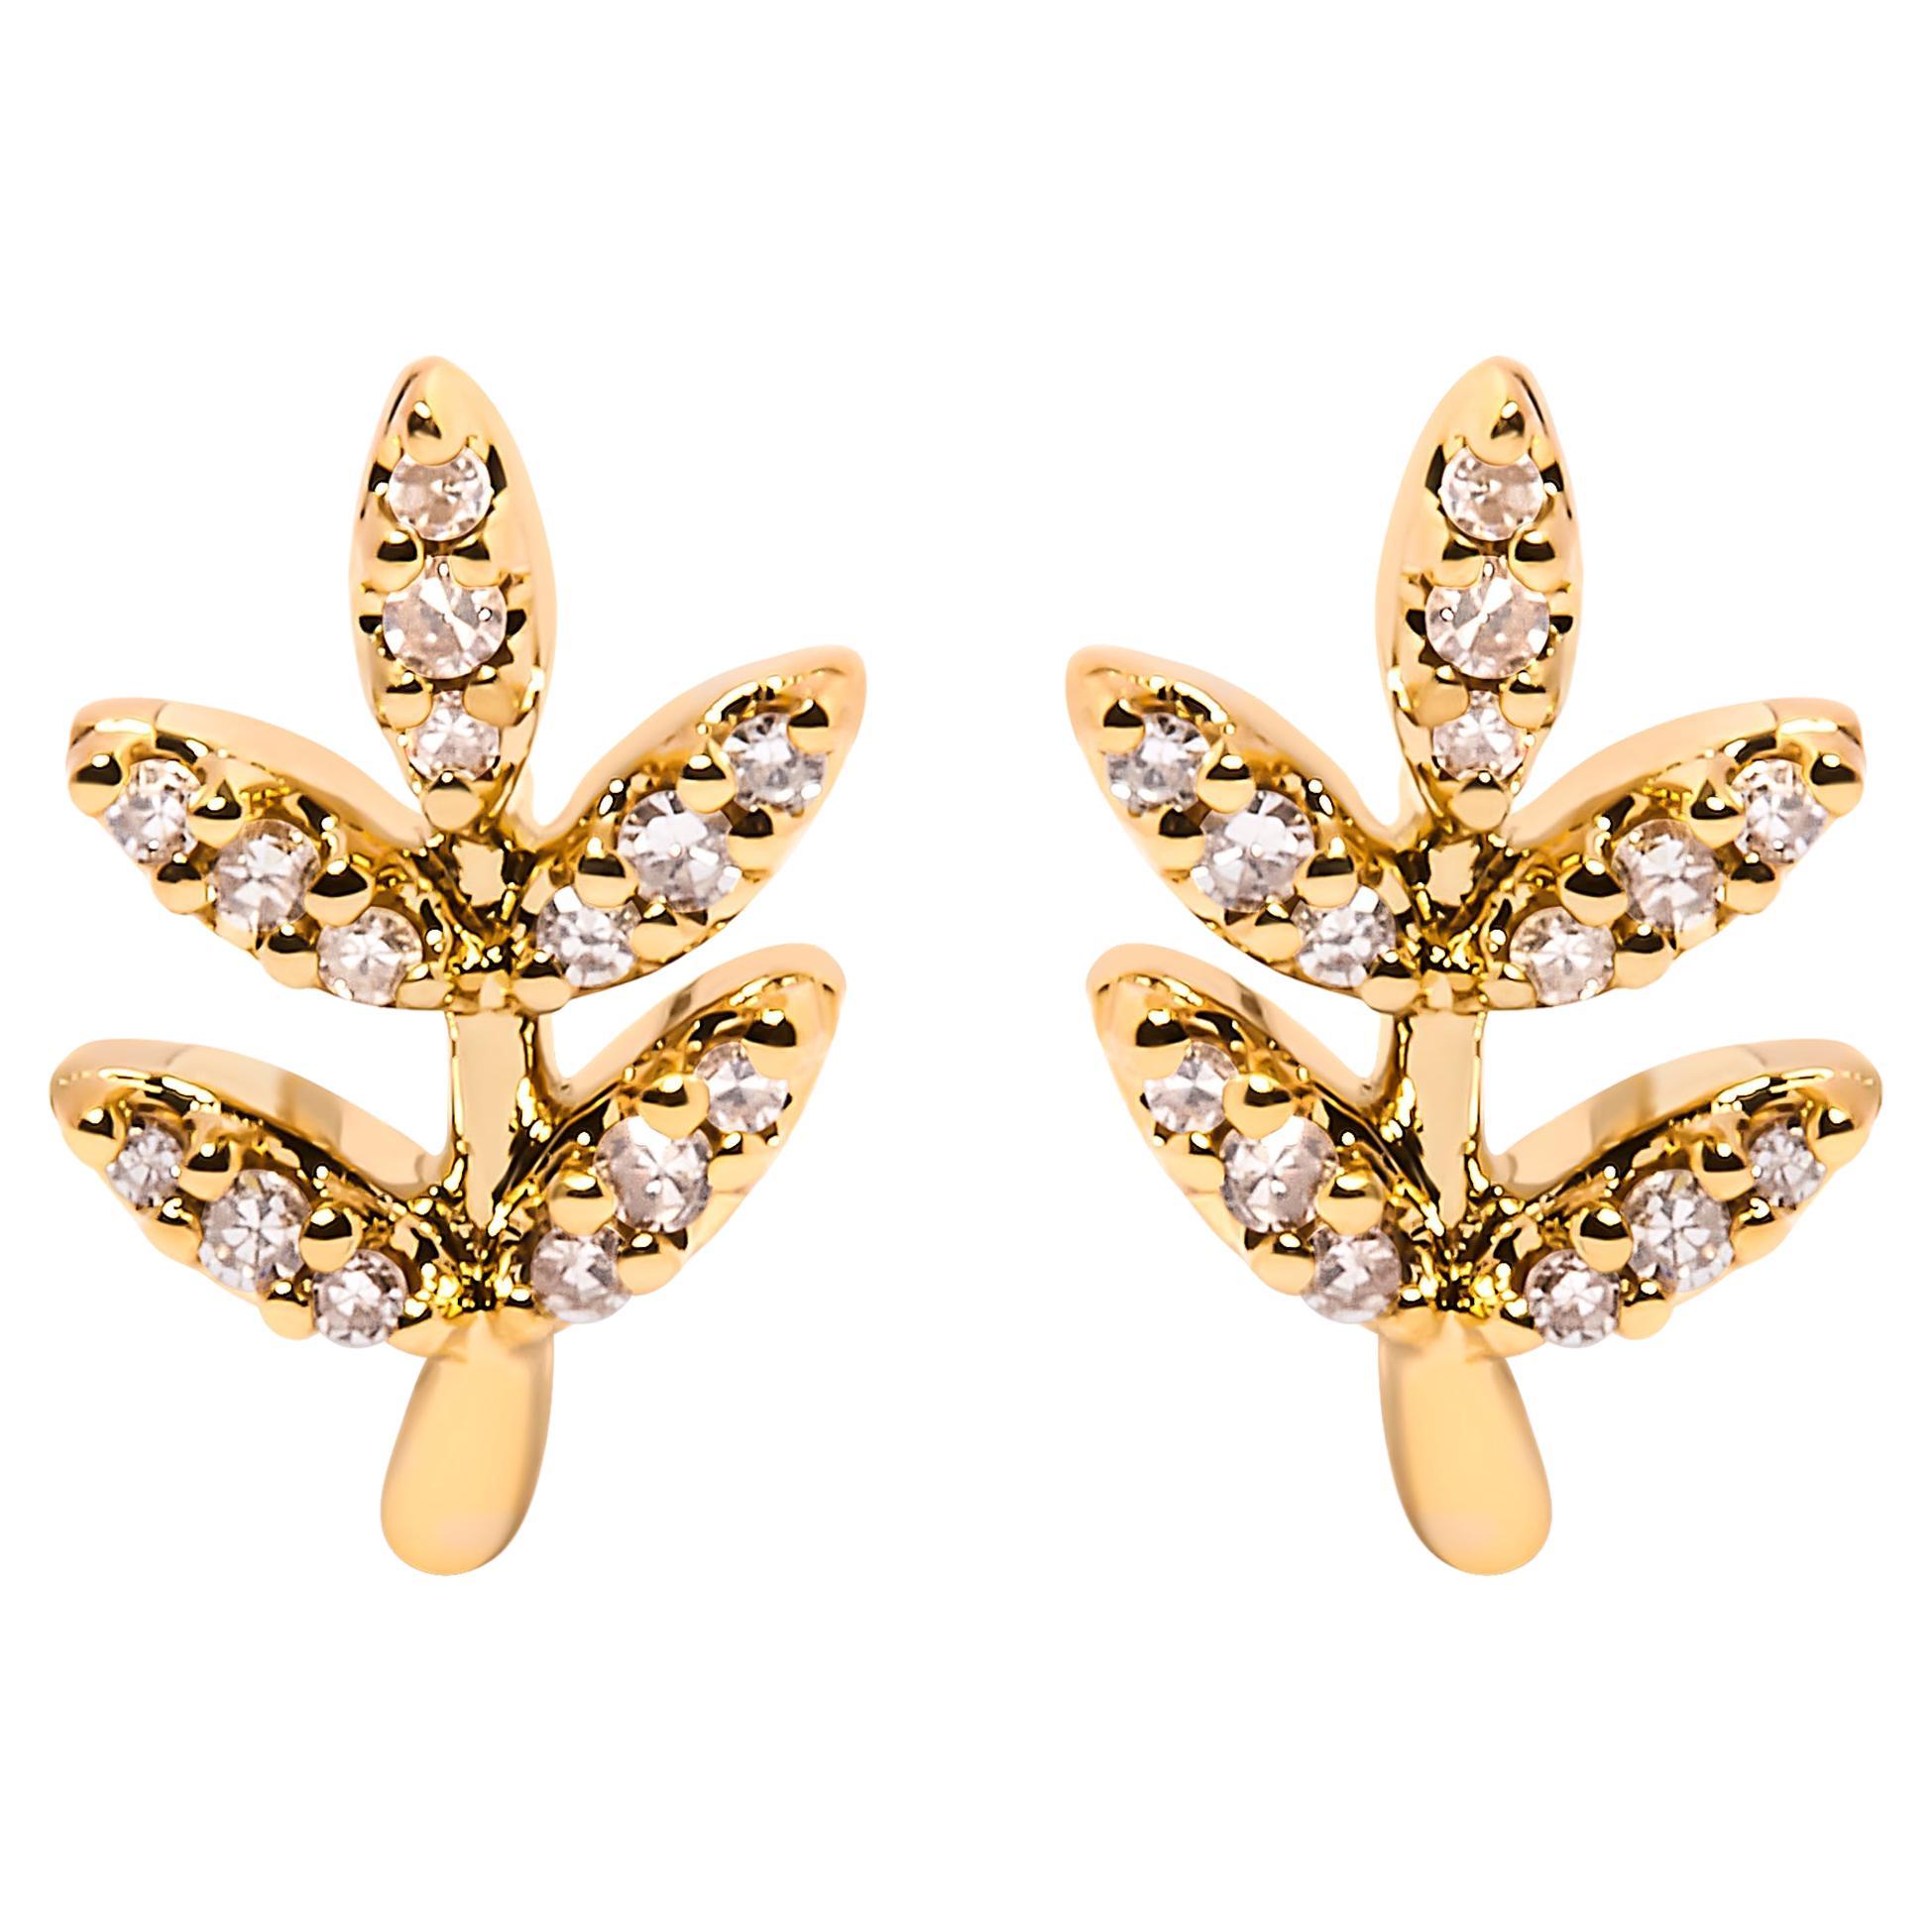 10K Yellow Gold 1/10 Carat Diamond Accented Leaf and Branch Stud Earrings For Sale